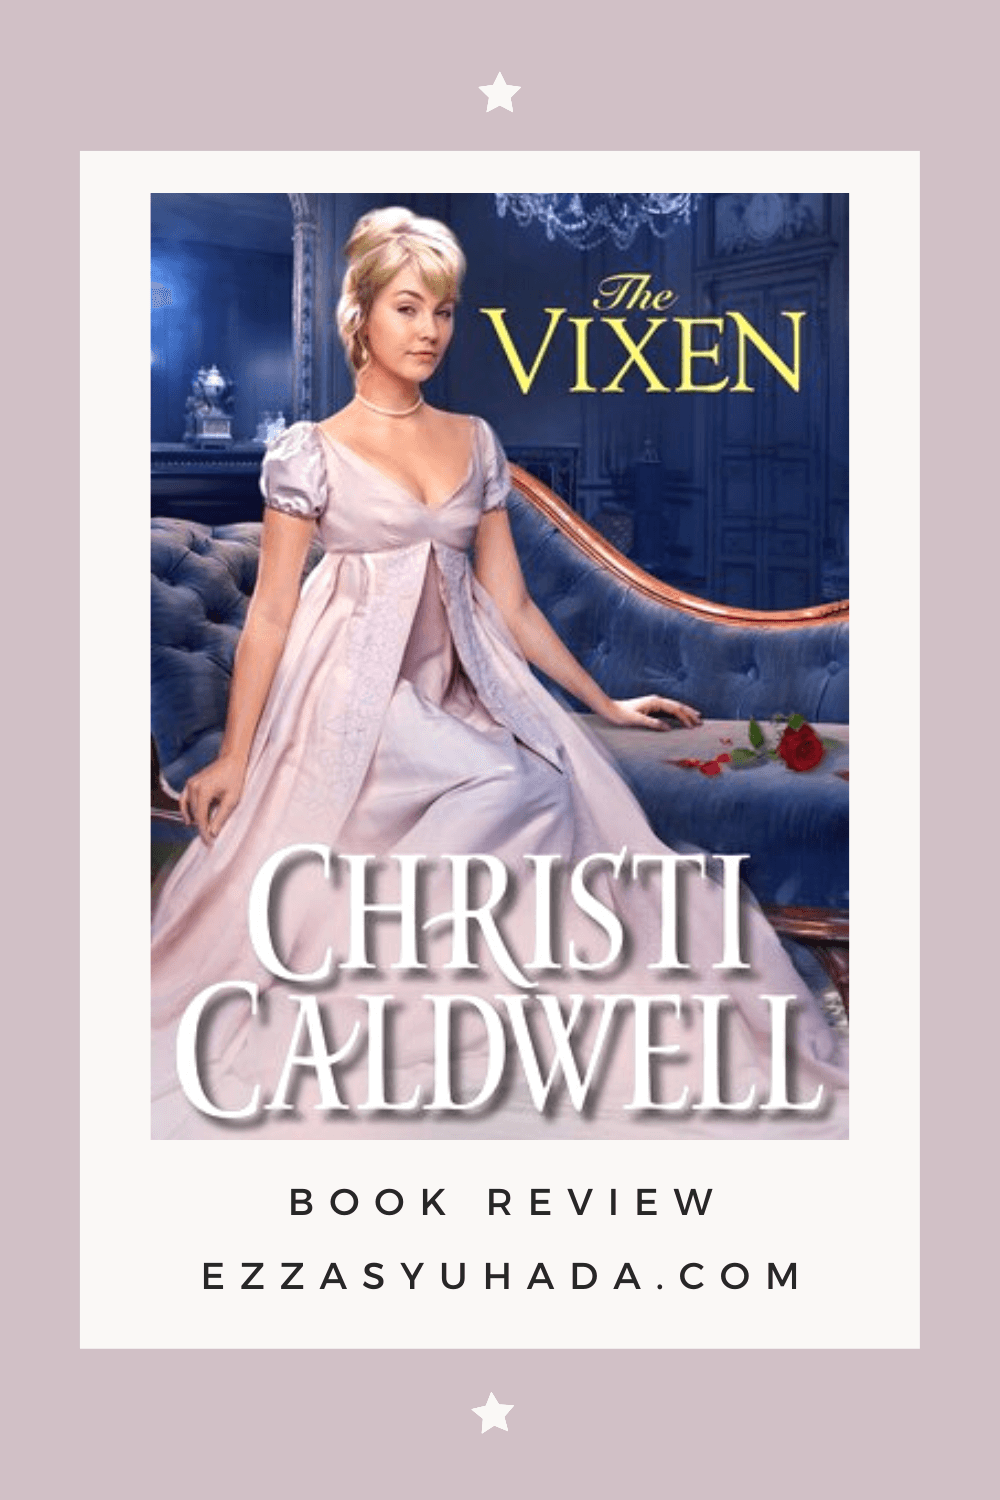 Book Review: The Vixen by Christi Caldwell